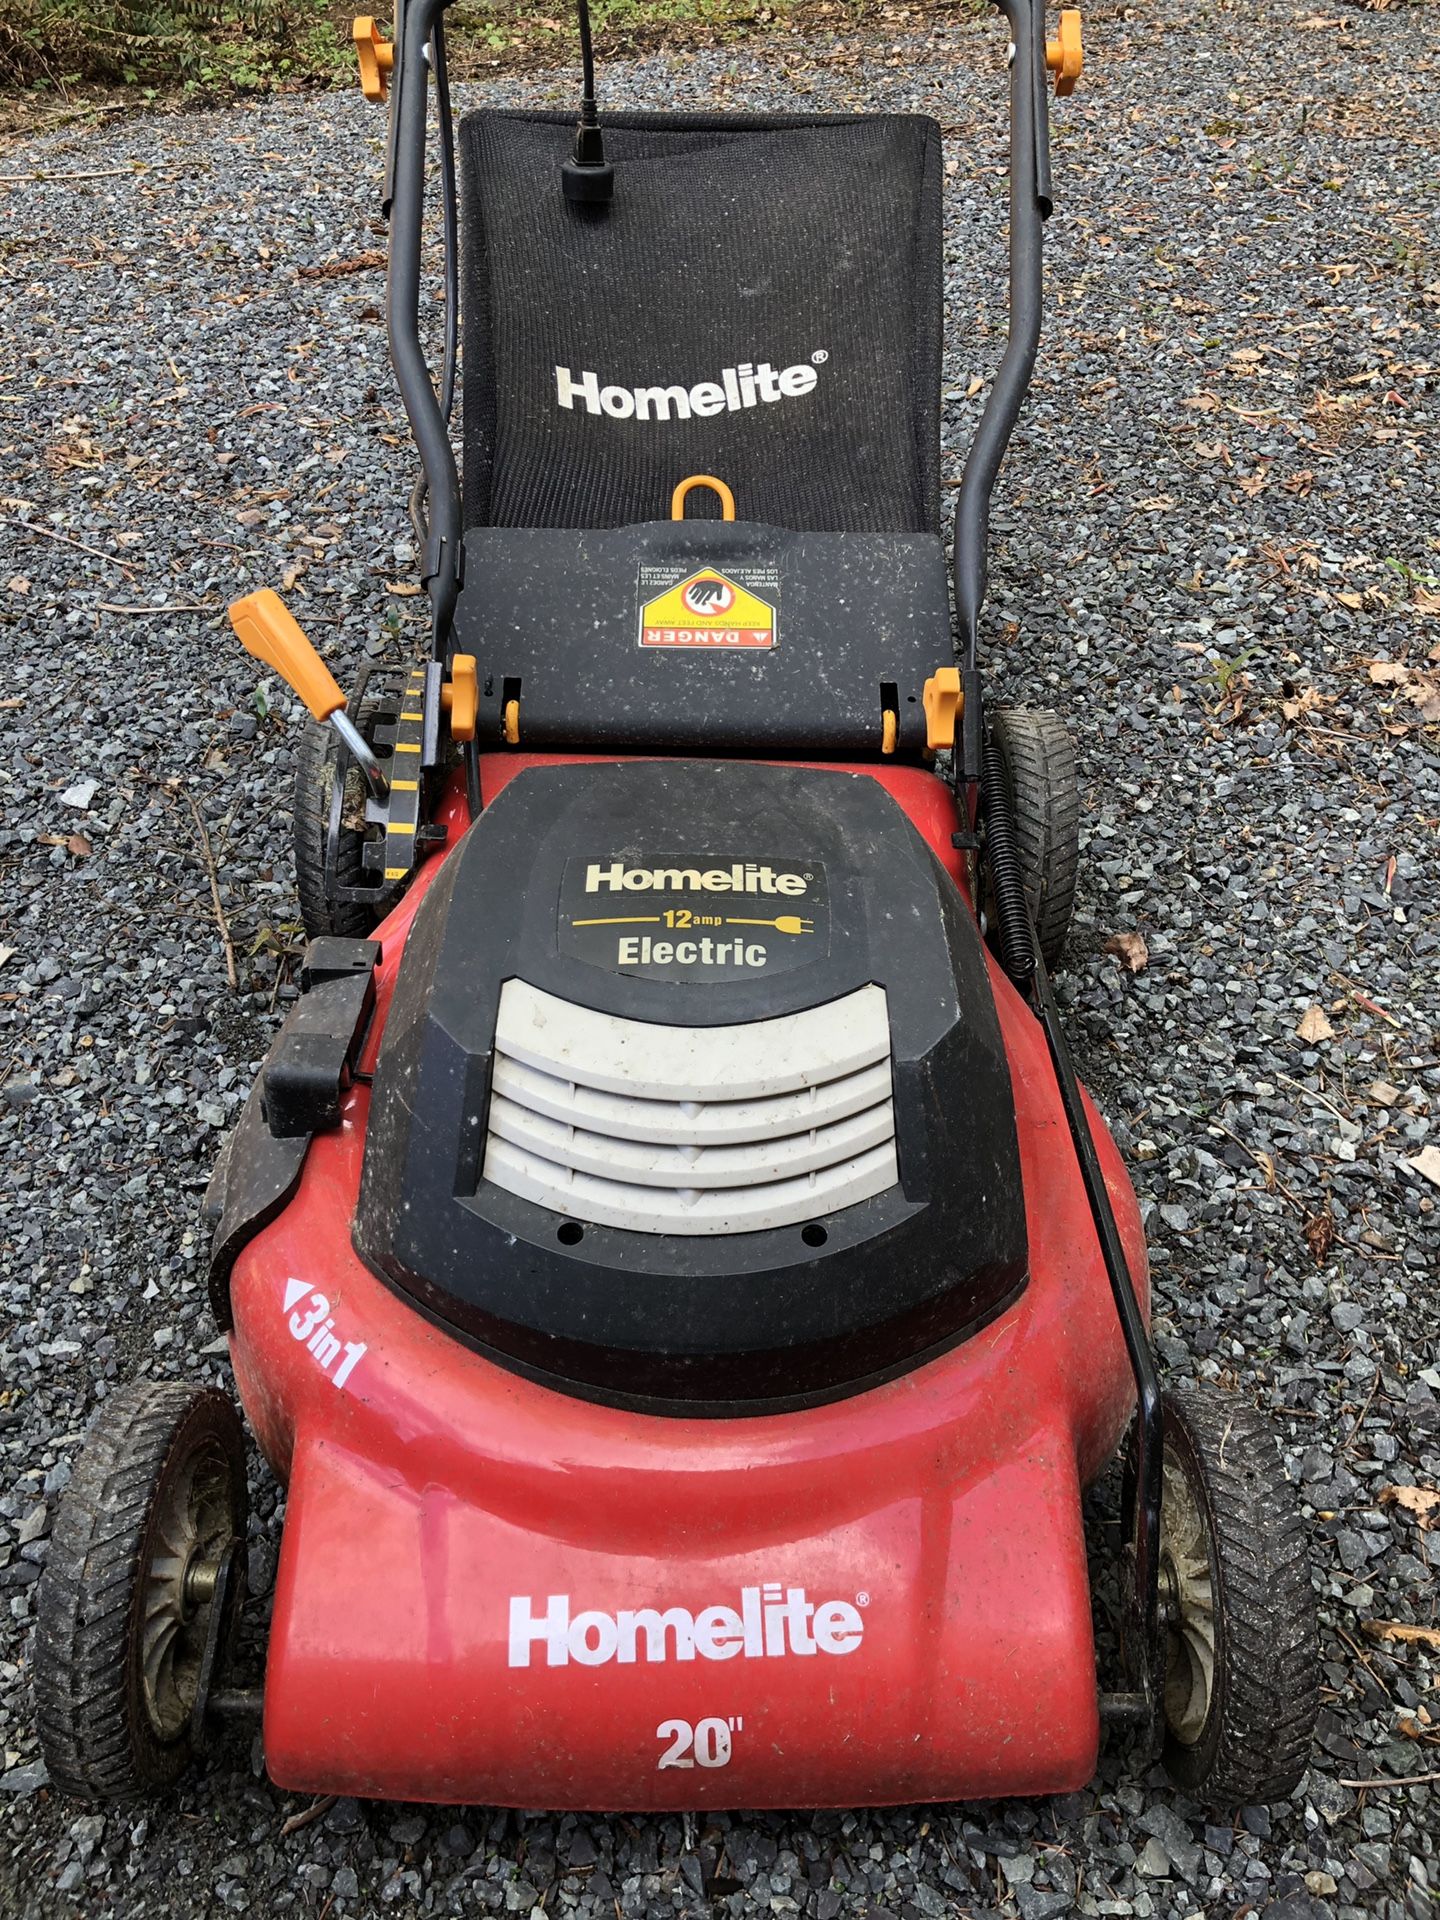 Homelite corded electric lawn mower